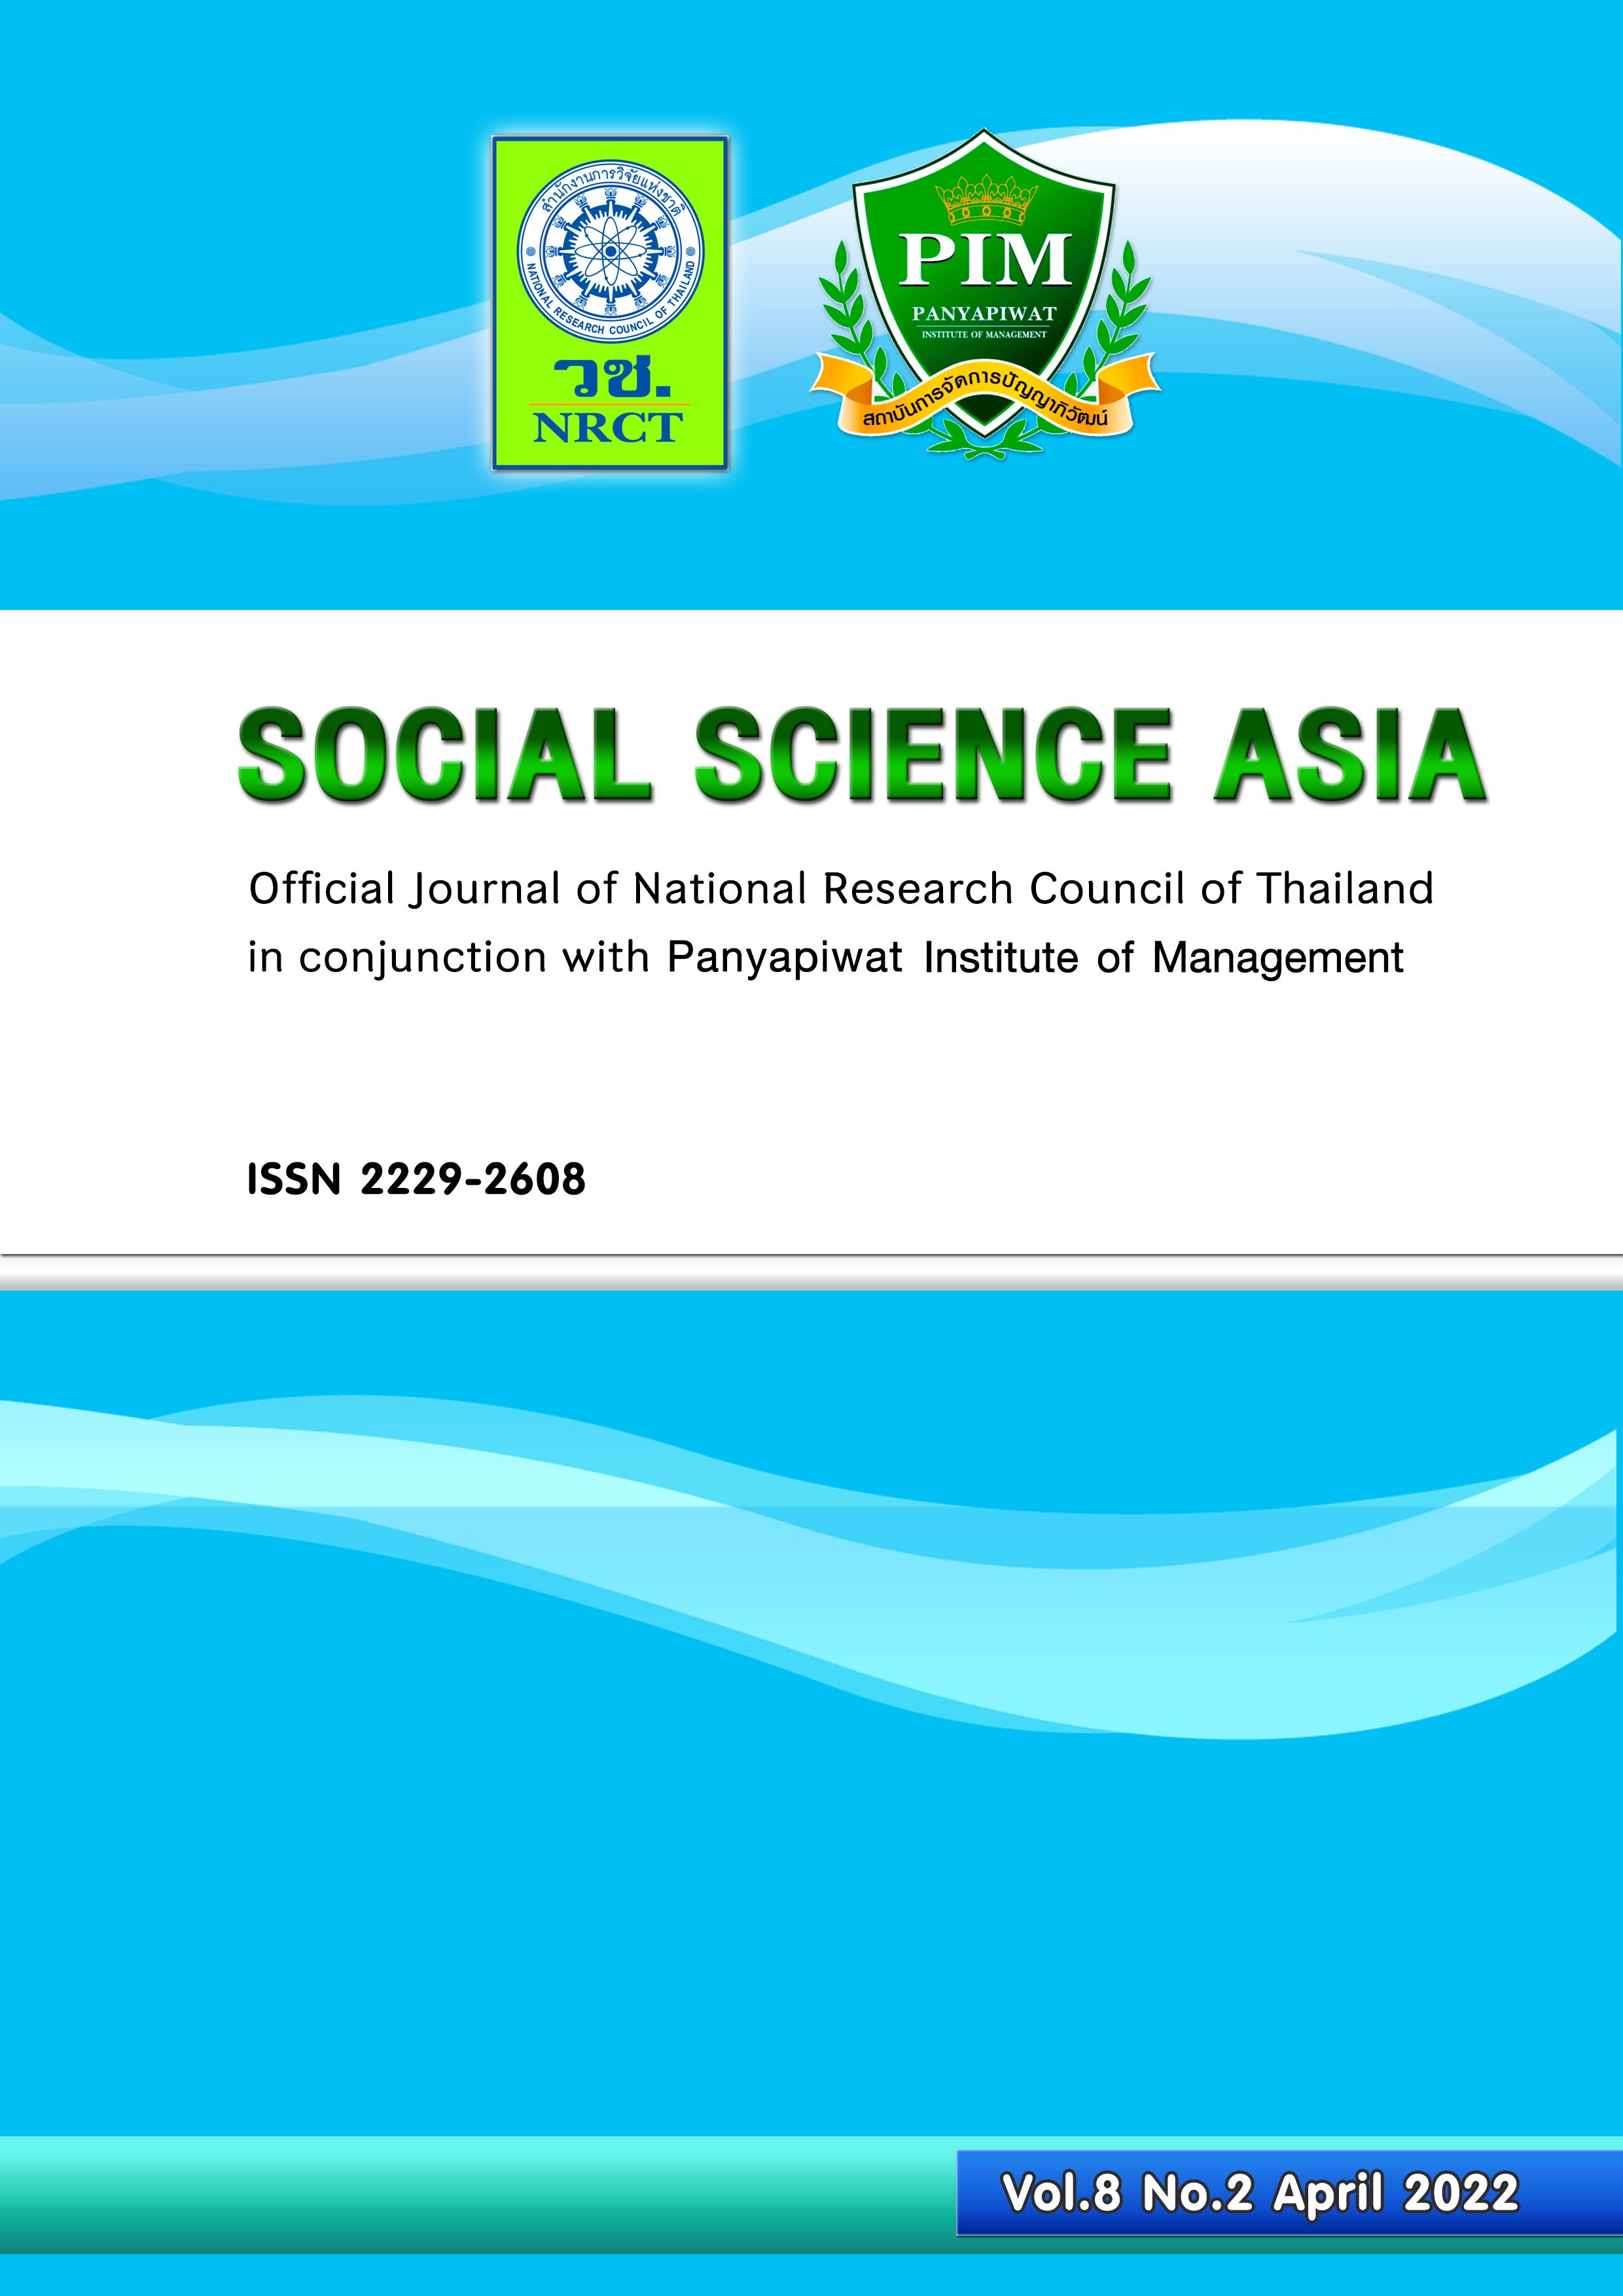 Official Journal of National Research Council of Thailand in conjunction with Panyapiwat Institute of Management